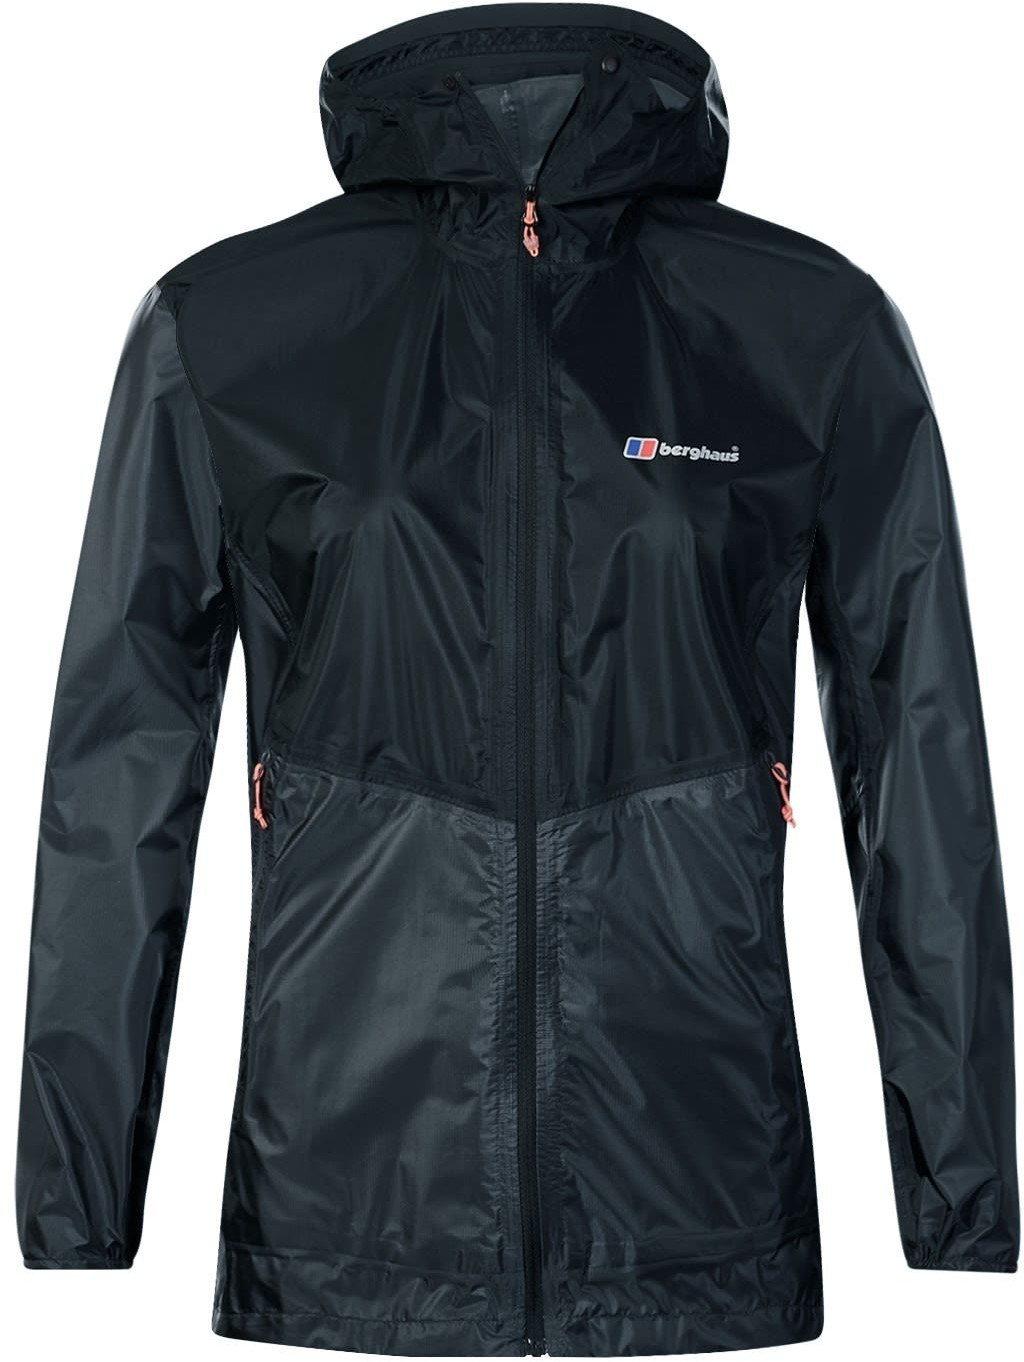 Buy Berghaus Fast Hike Hardshell Jacket from £94.95 (Today) – Best ...